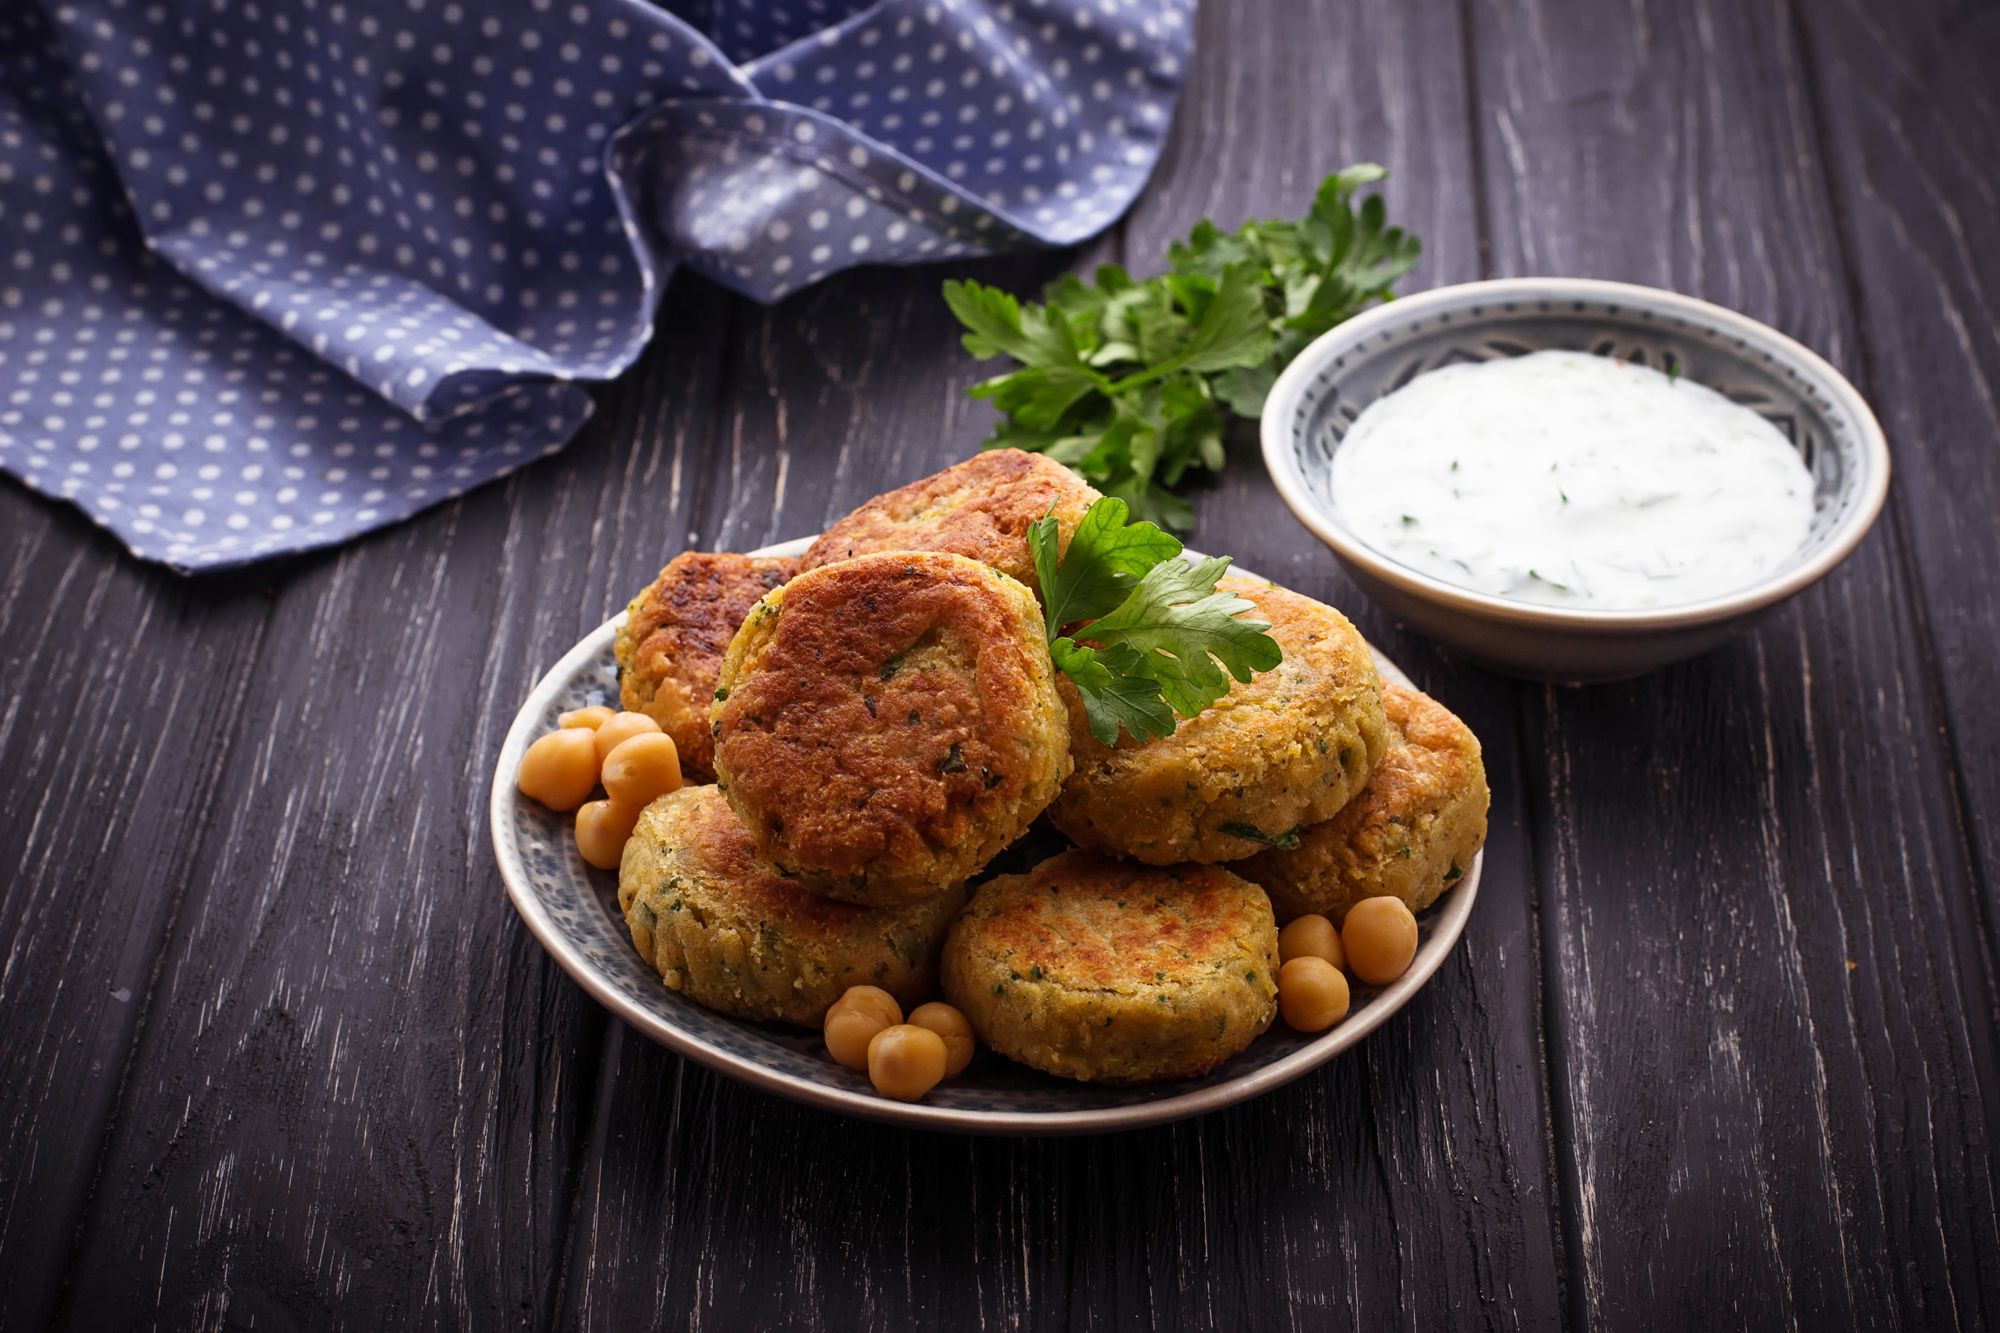 Lamb and Chickpea Fritters